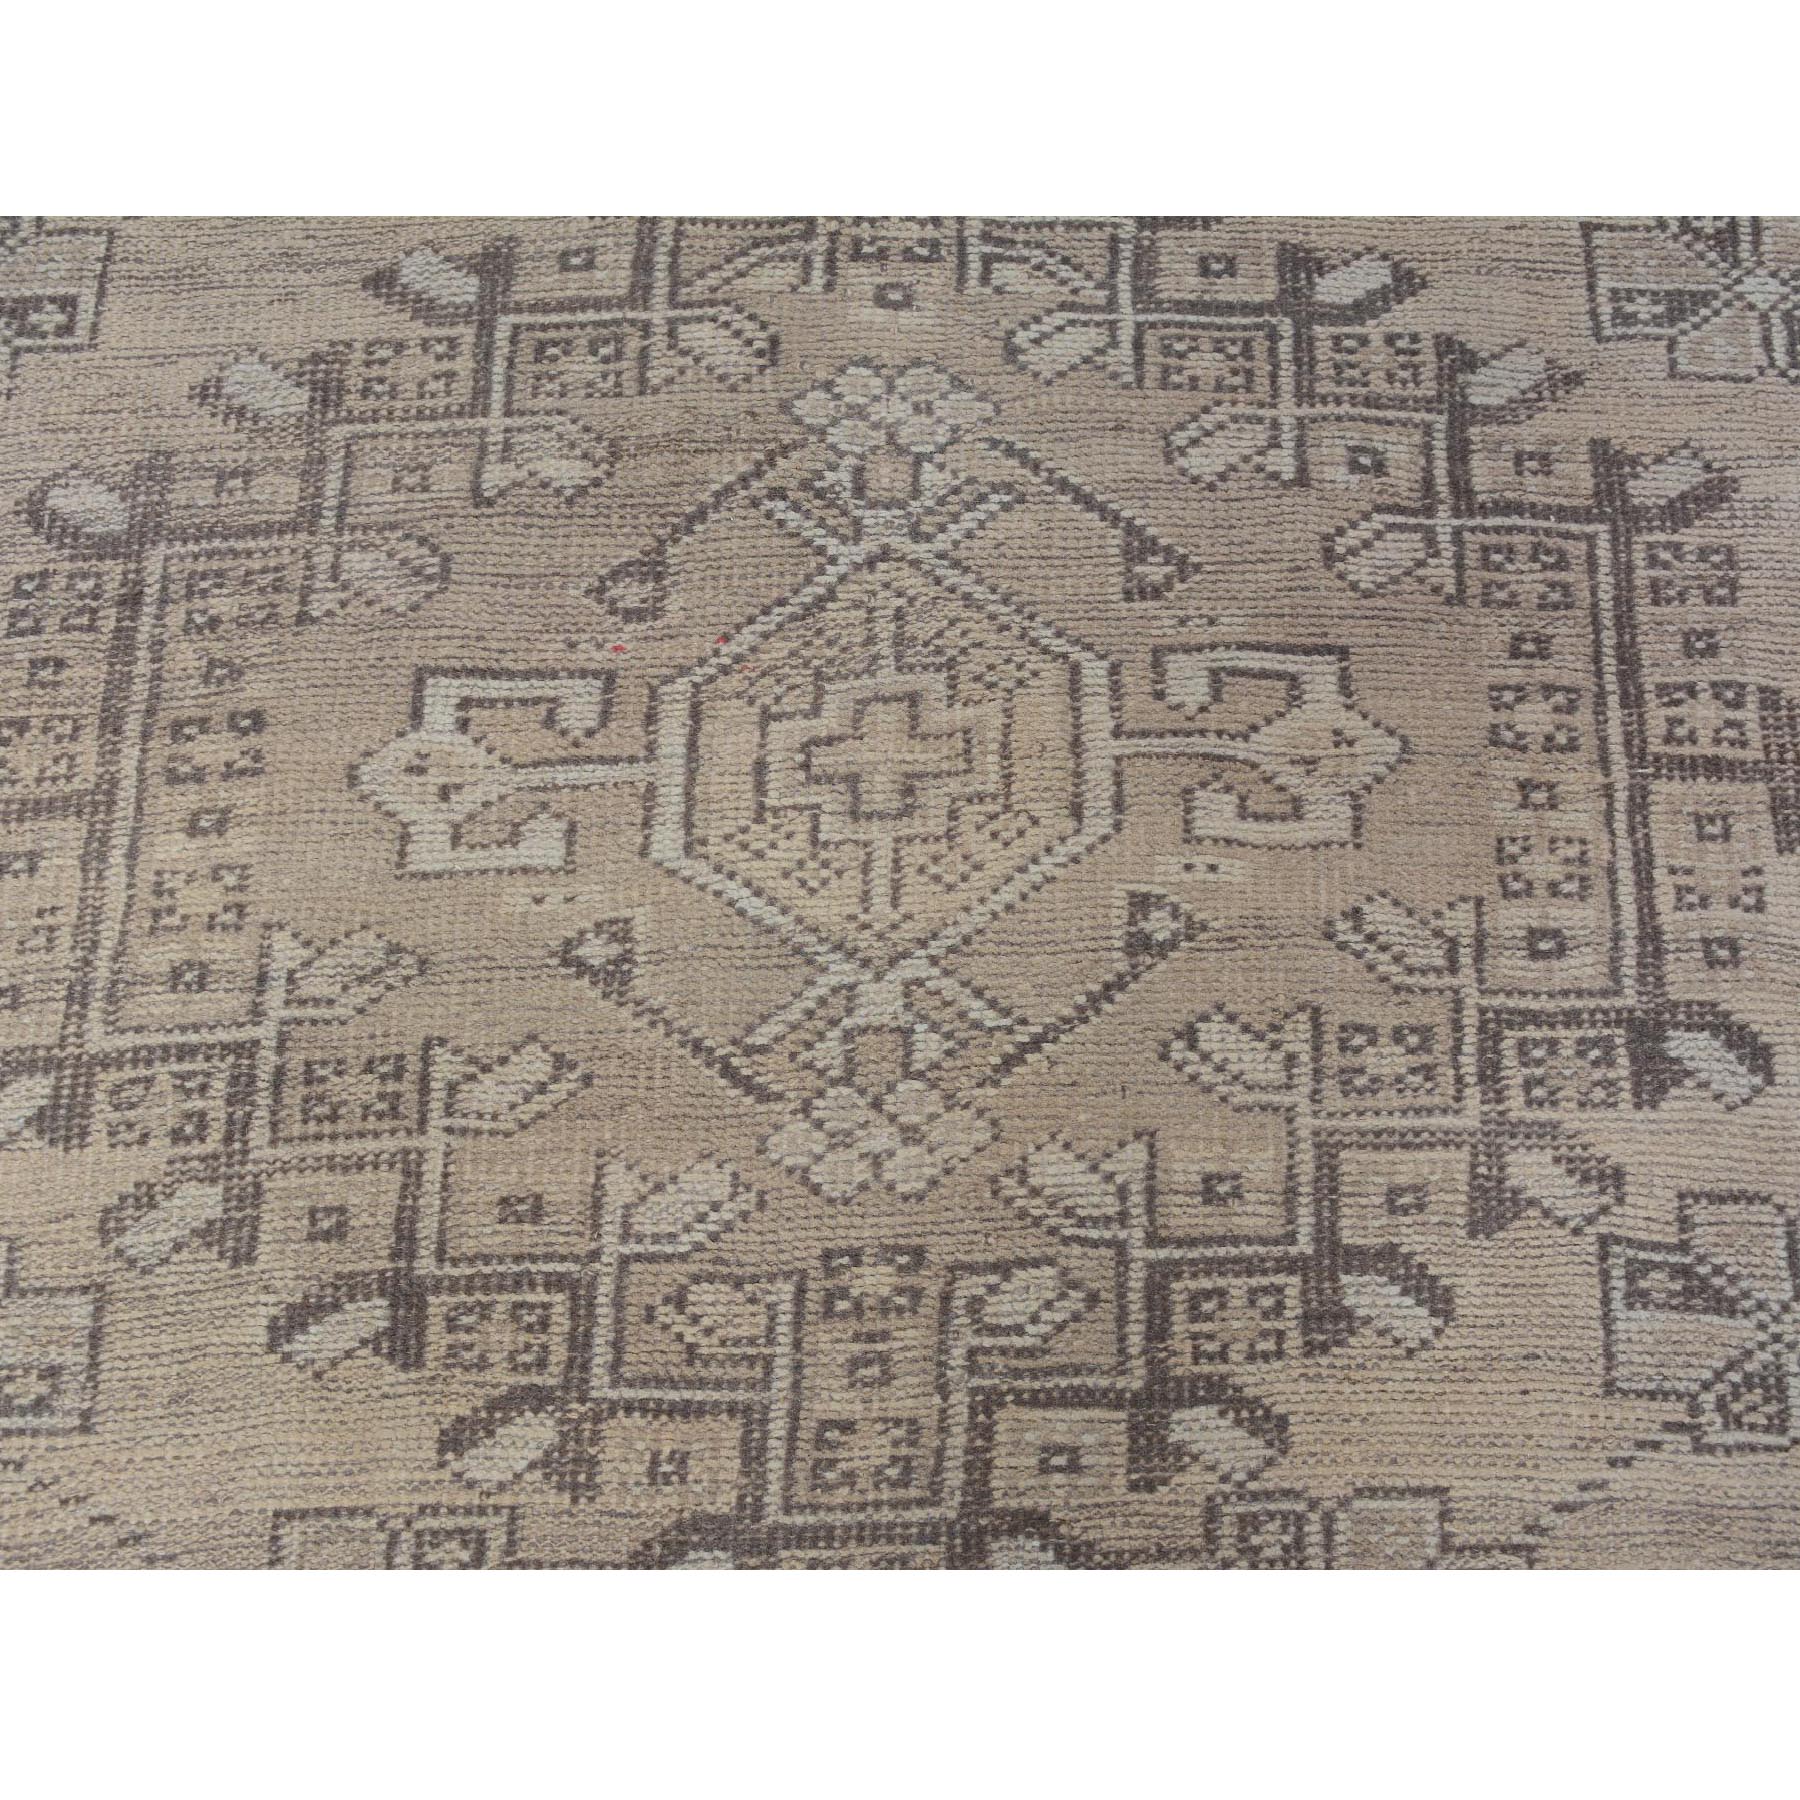 6-6 x10-2  Earth Tones Vintage and Worn Down Pure Wool Hand Knotted Bohemian Rug 